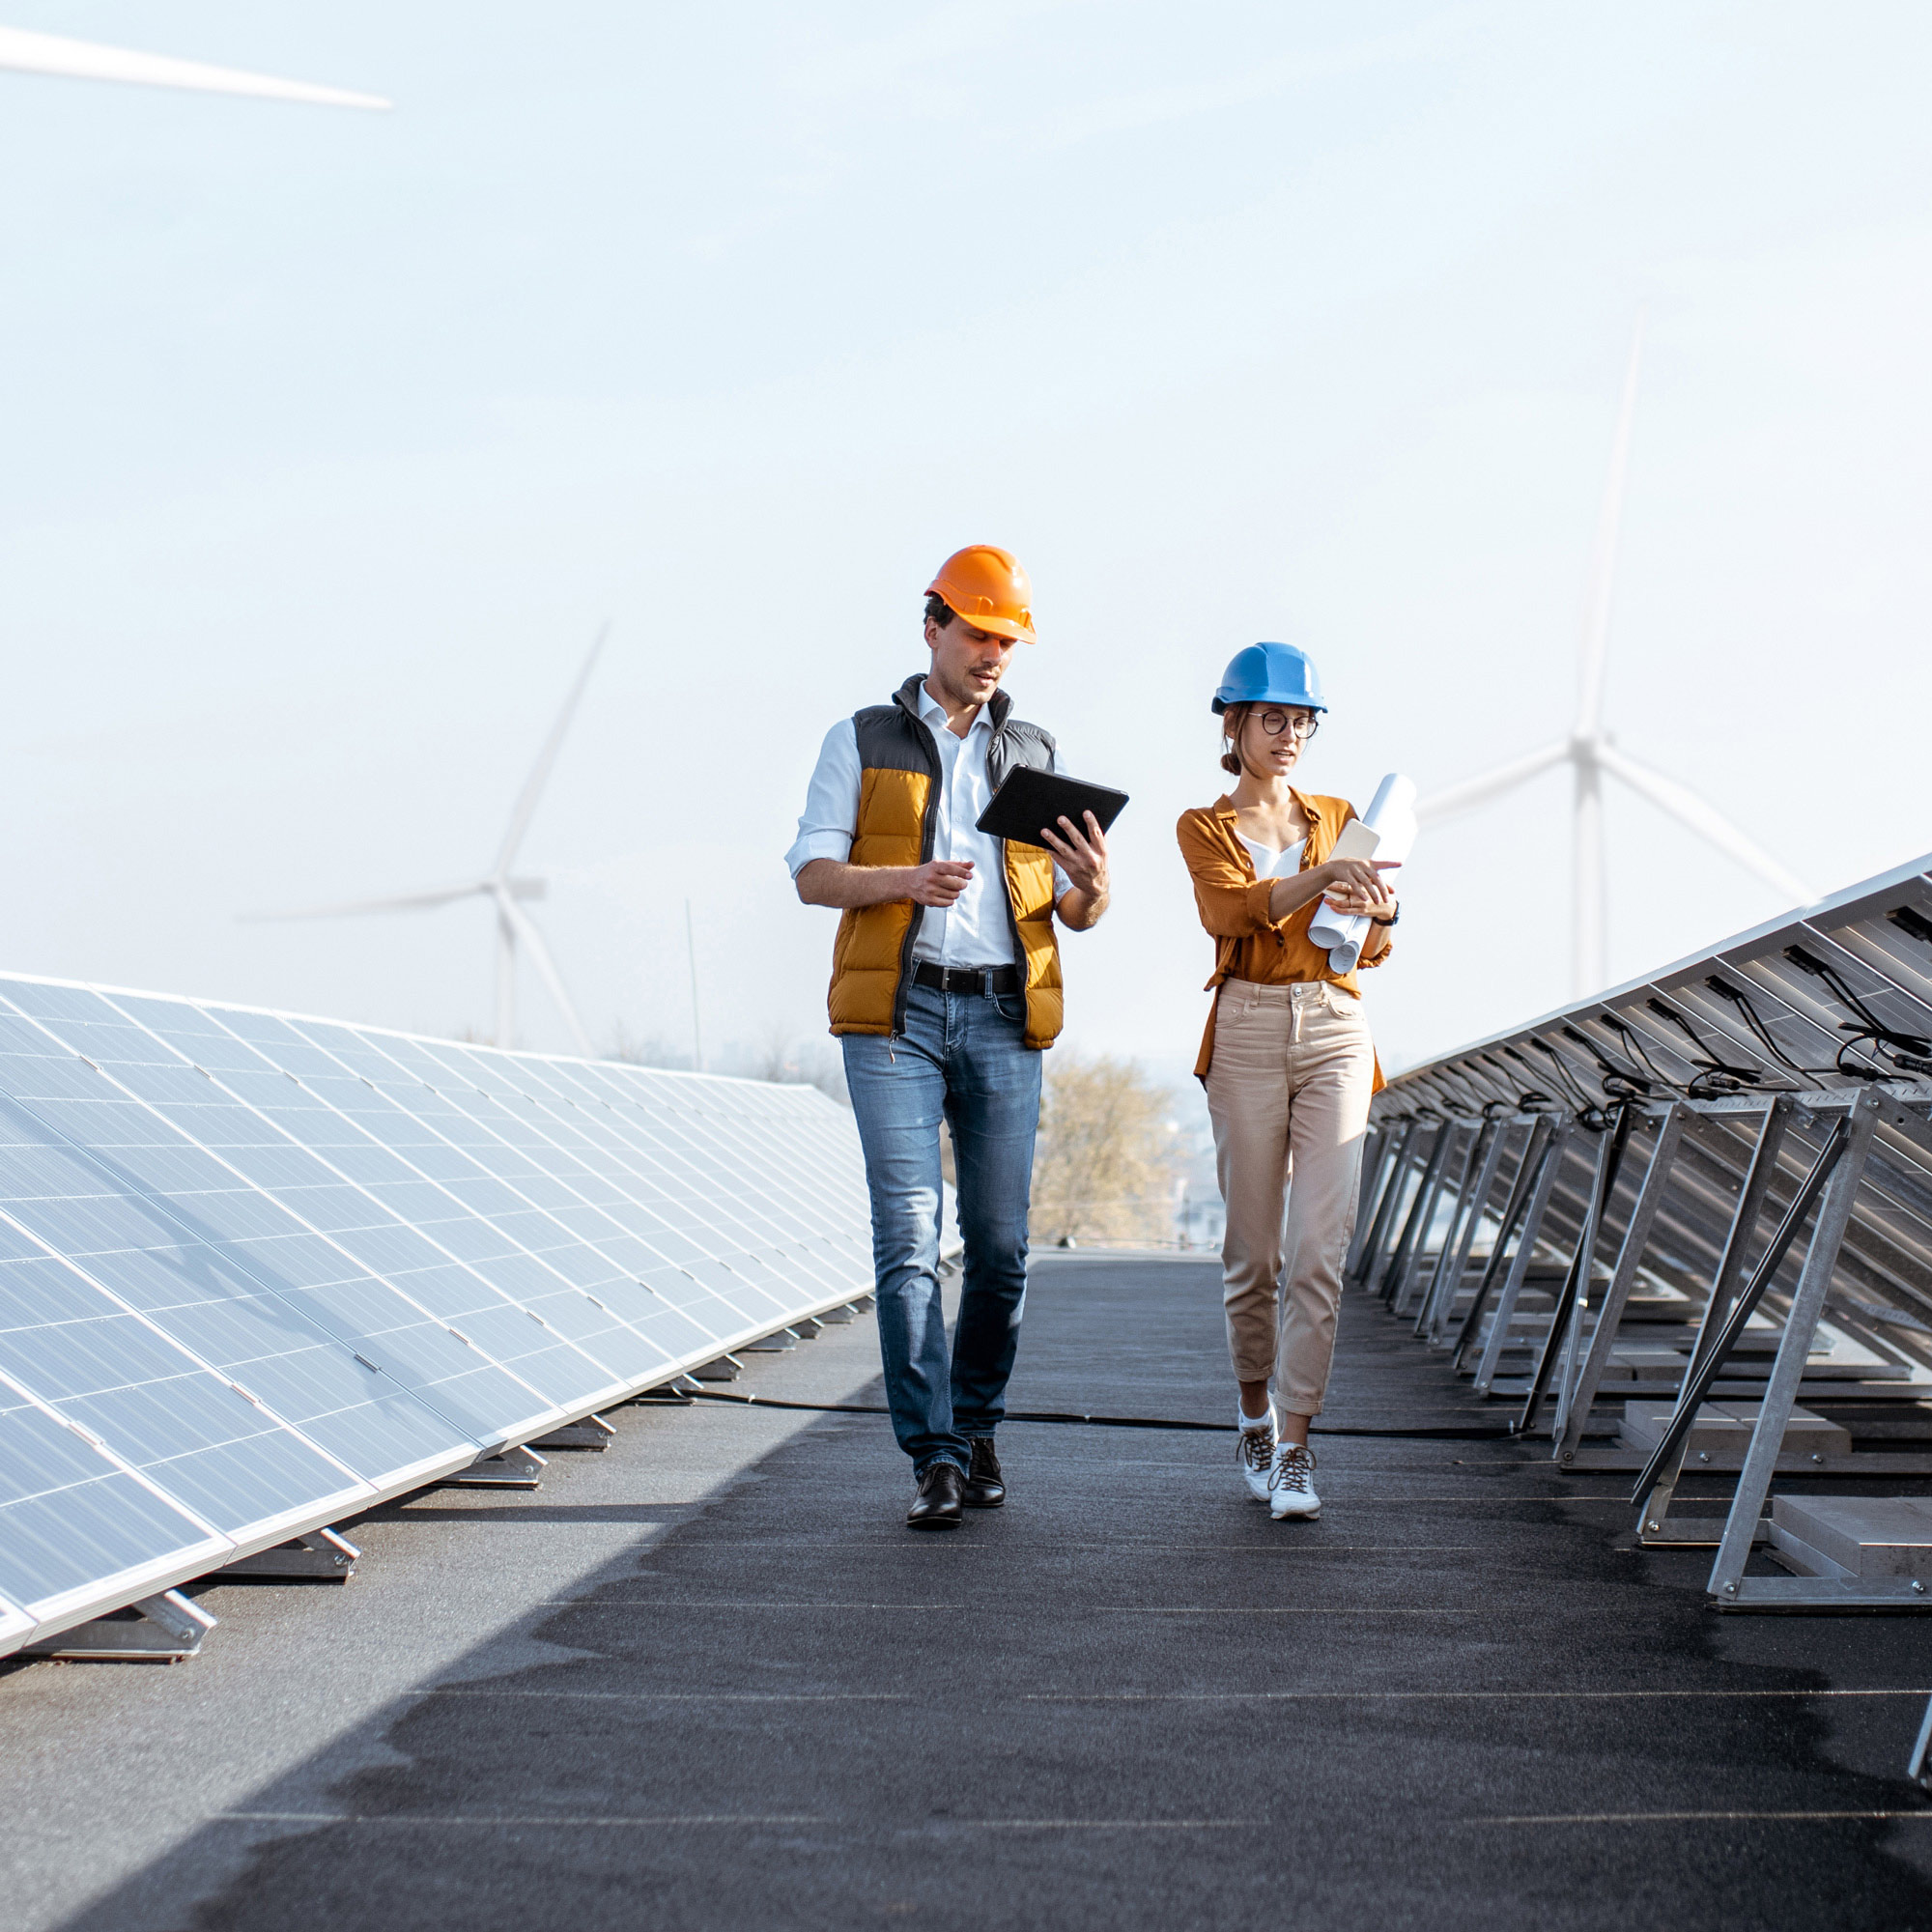 A man and a woman wearing hard hats walking between two rows of solar panels